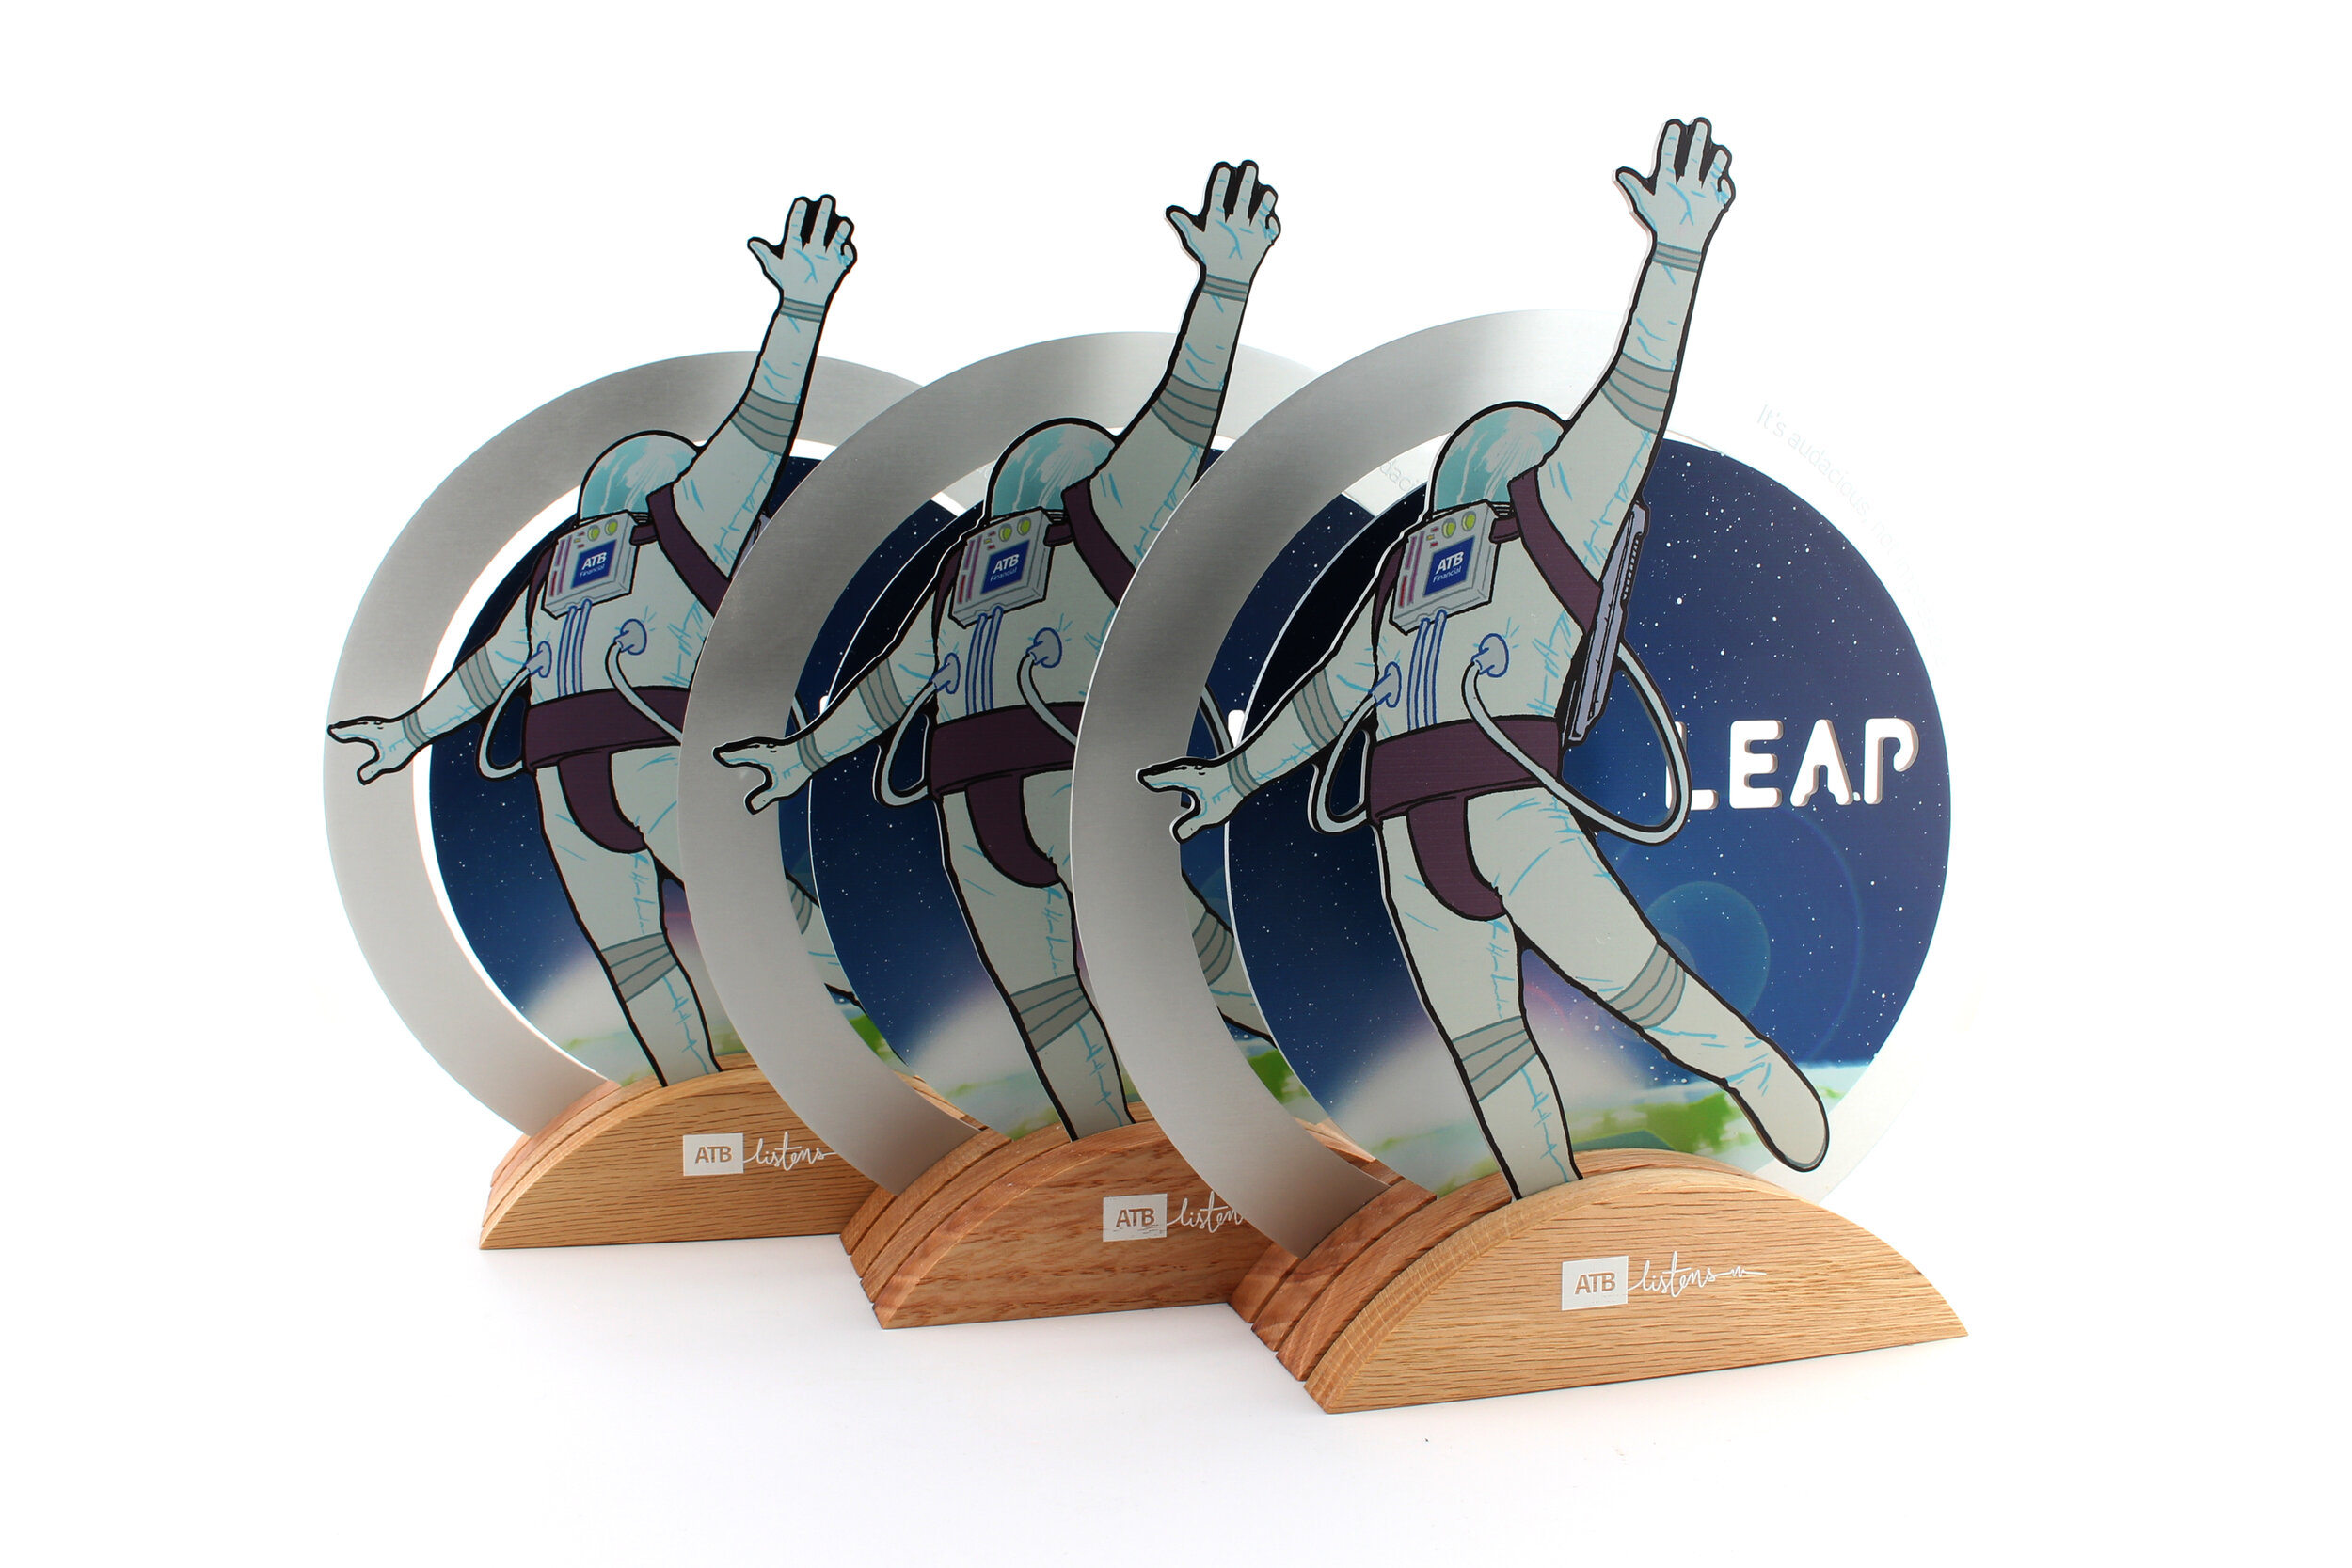 ATB leap awards for staff appreciation and workplace event high quality creative design 3